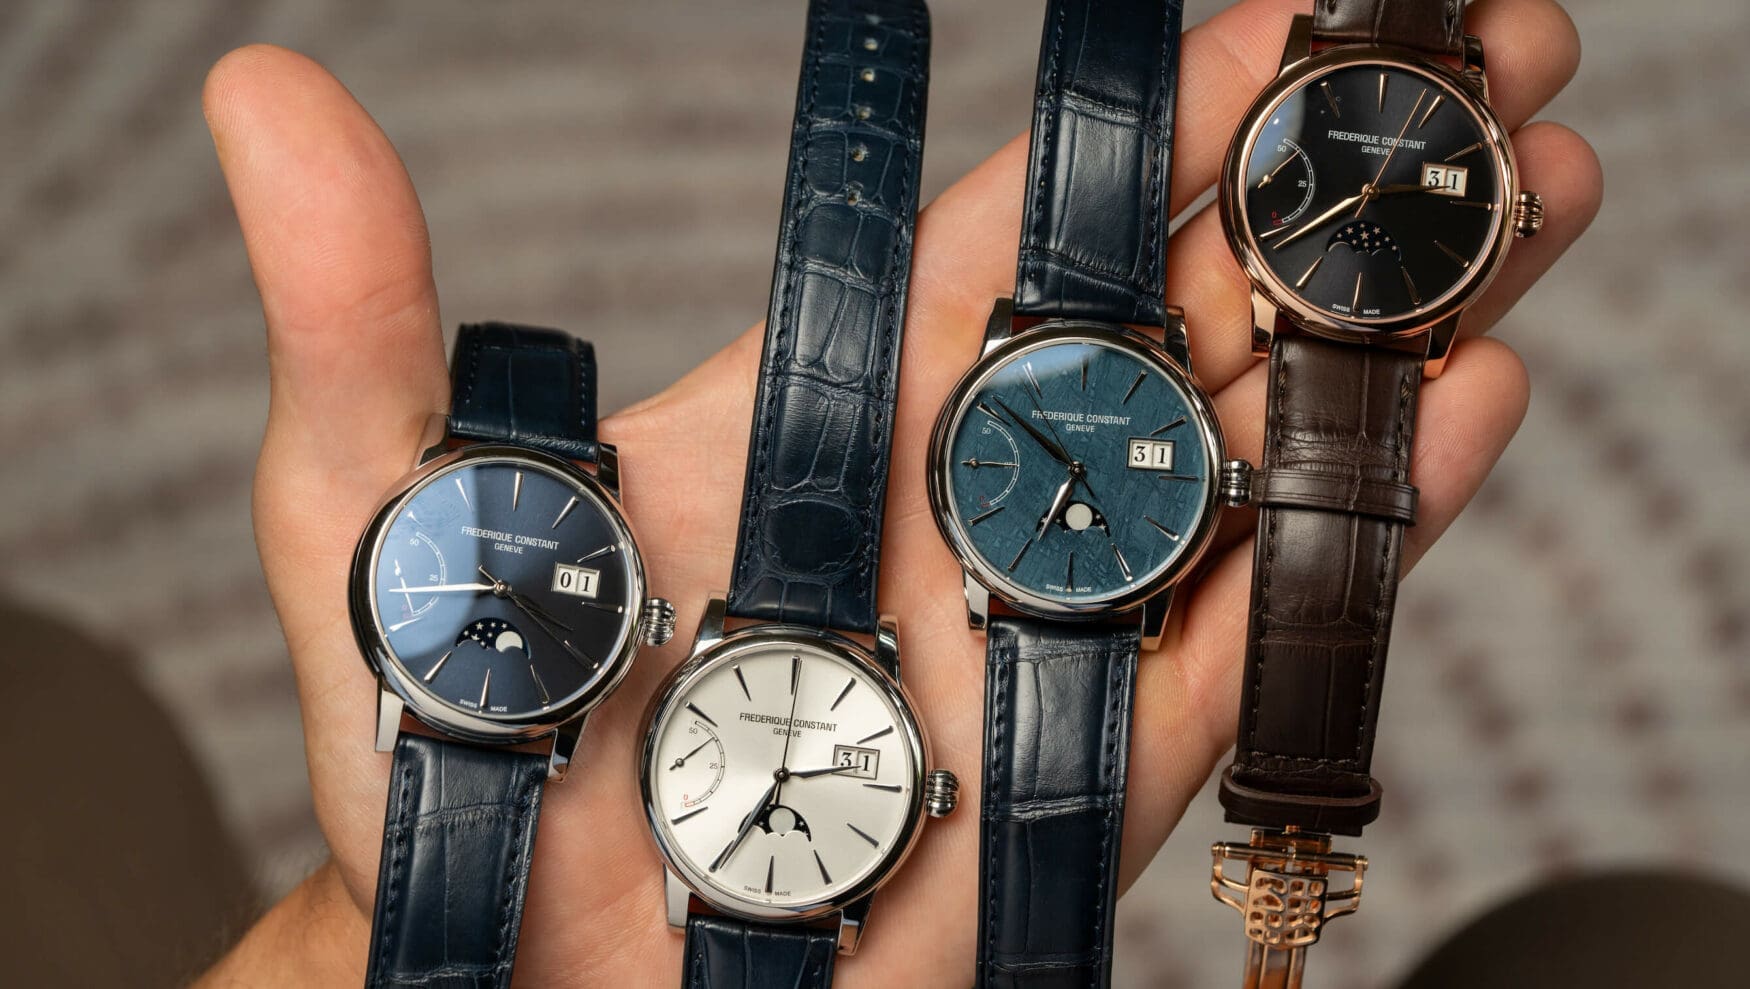 The Frederique Constant Power Reserve Big Date sports the brand’s 31st in-house calibre